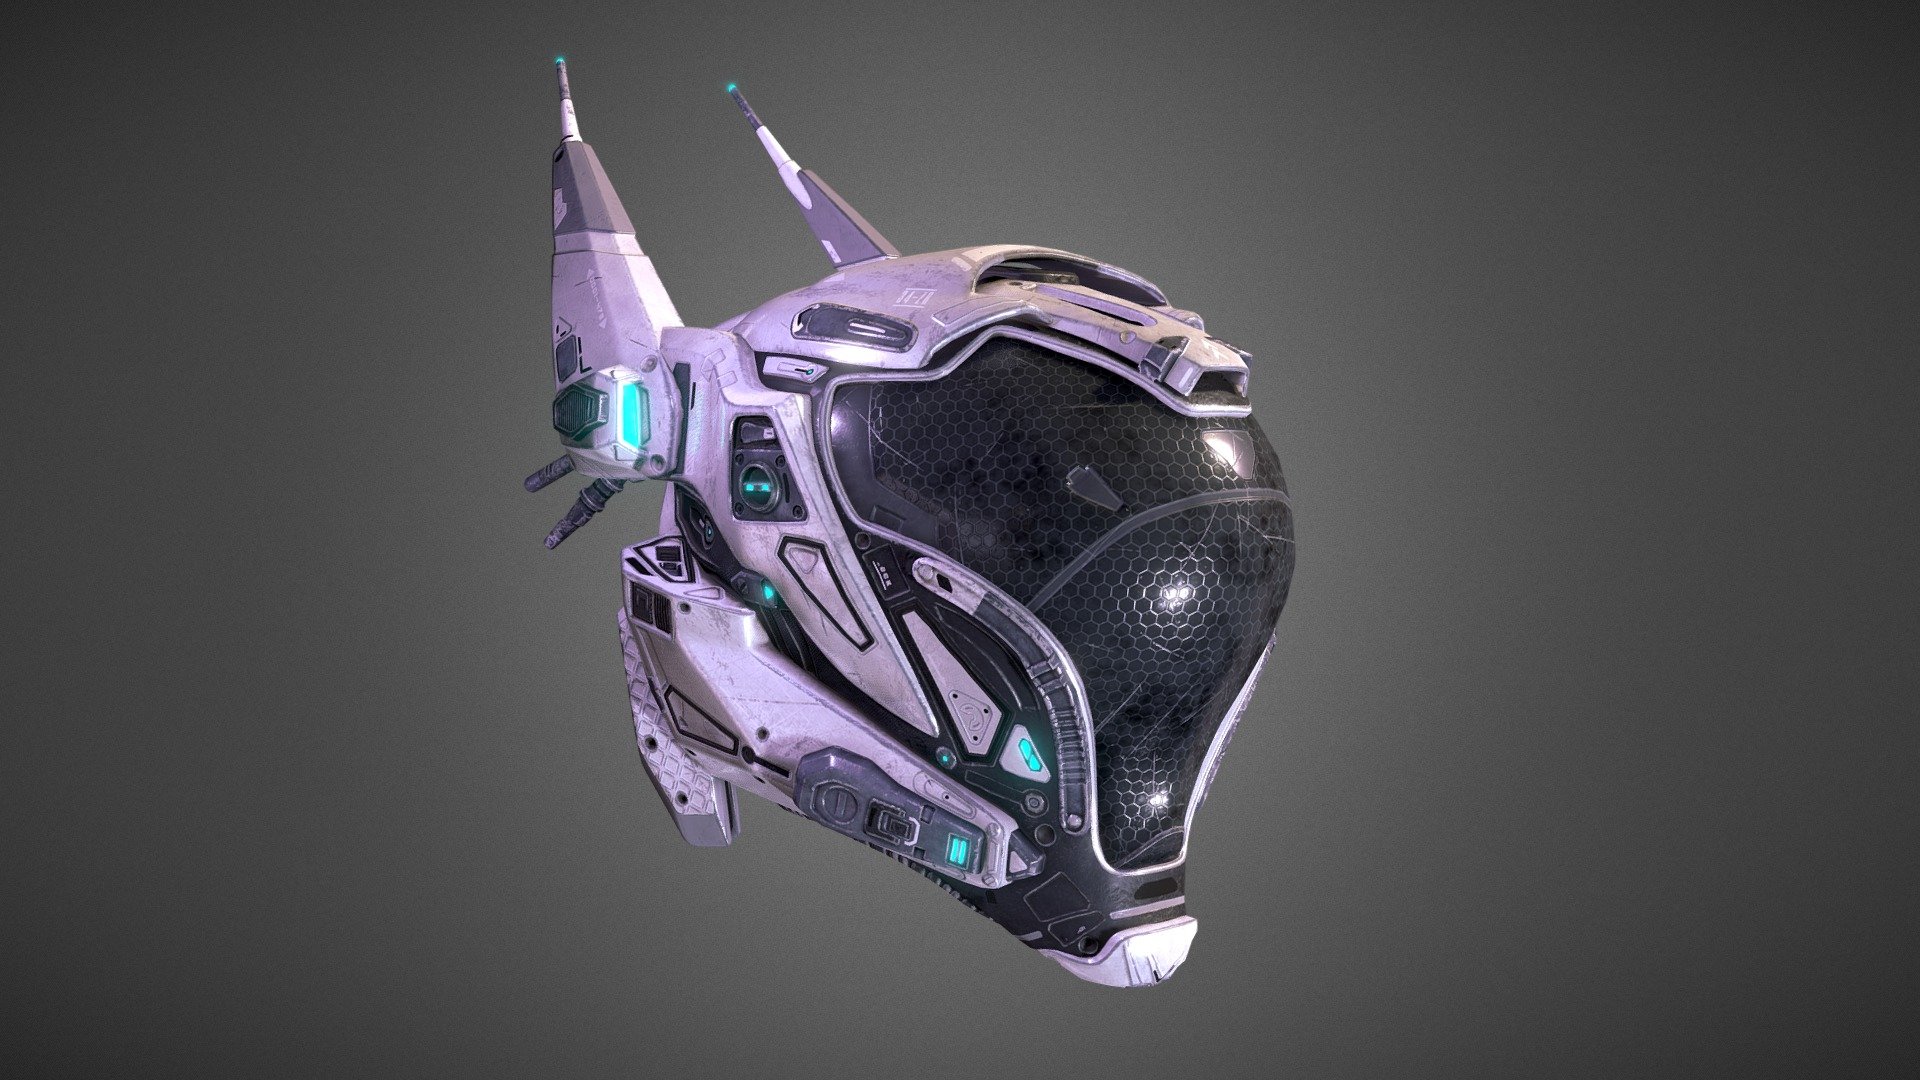 SciFi/Cyberpunk inspired helmet. Original design by me.
With this project I tried to experiment a new workflow. I created my own alphas in maya to create a new brush in Zbrush. It allowed me to put a lot of small details on my helmet. I still wanted to retopo my model in order for it to be real time rendered. The final lowpoly model has exactly 20K tris, and has a single 2K textures

More pictures on my artstation : https://www.artstation.com/artwork/lVyvZa - Cyberpunk Helmet - 3D model by Minder 3d model